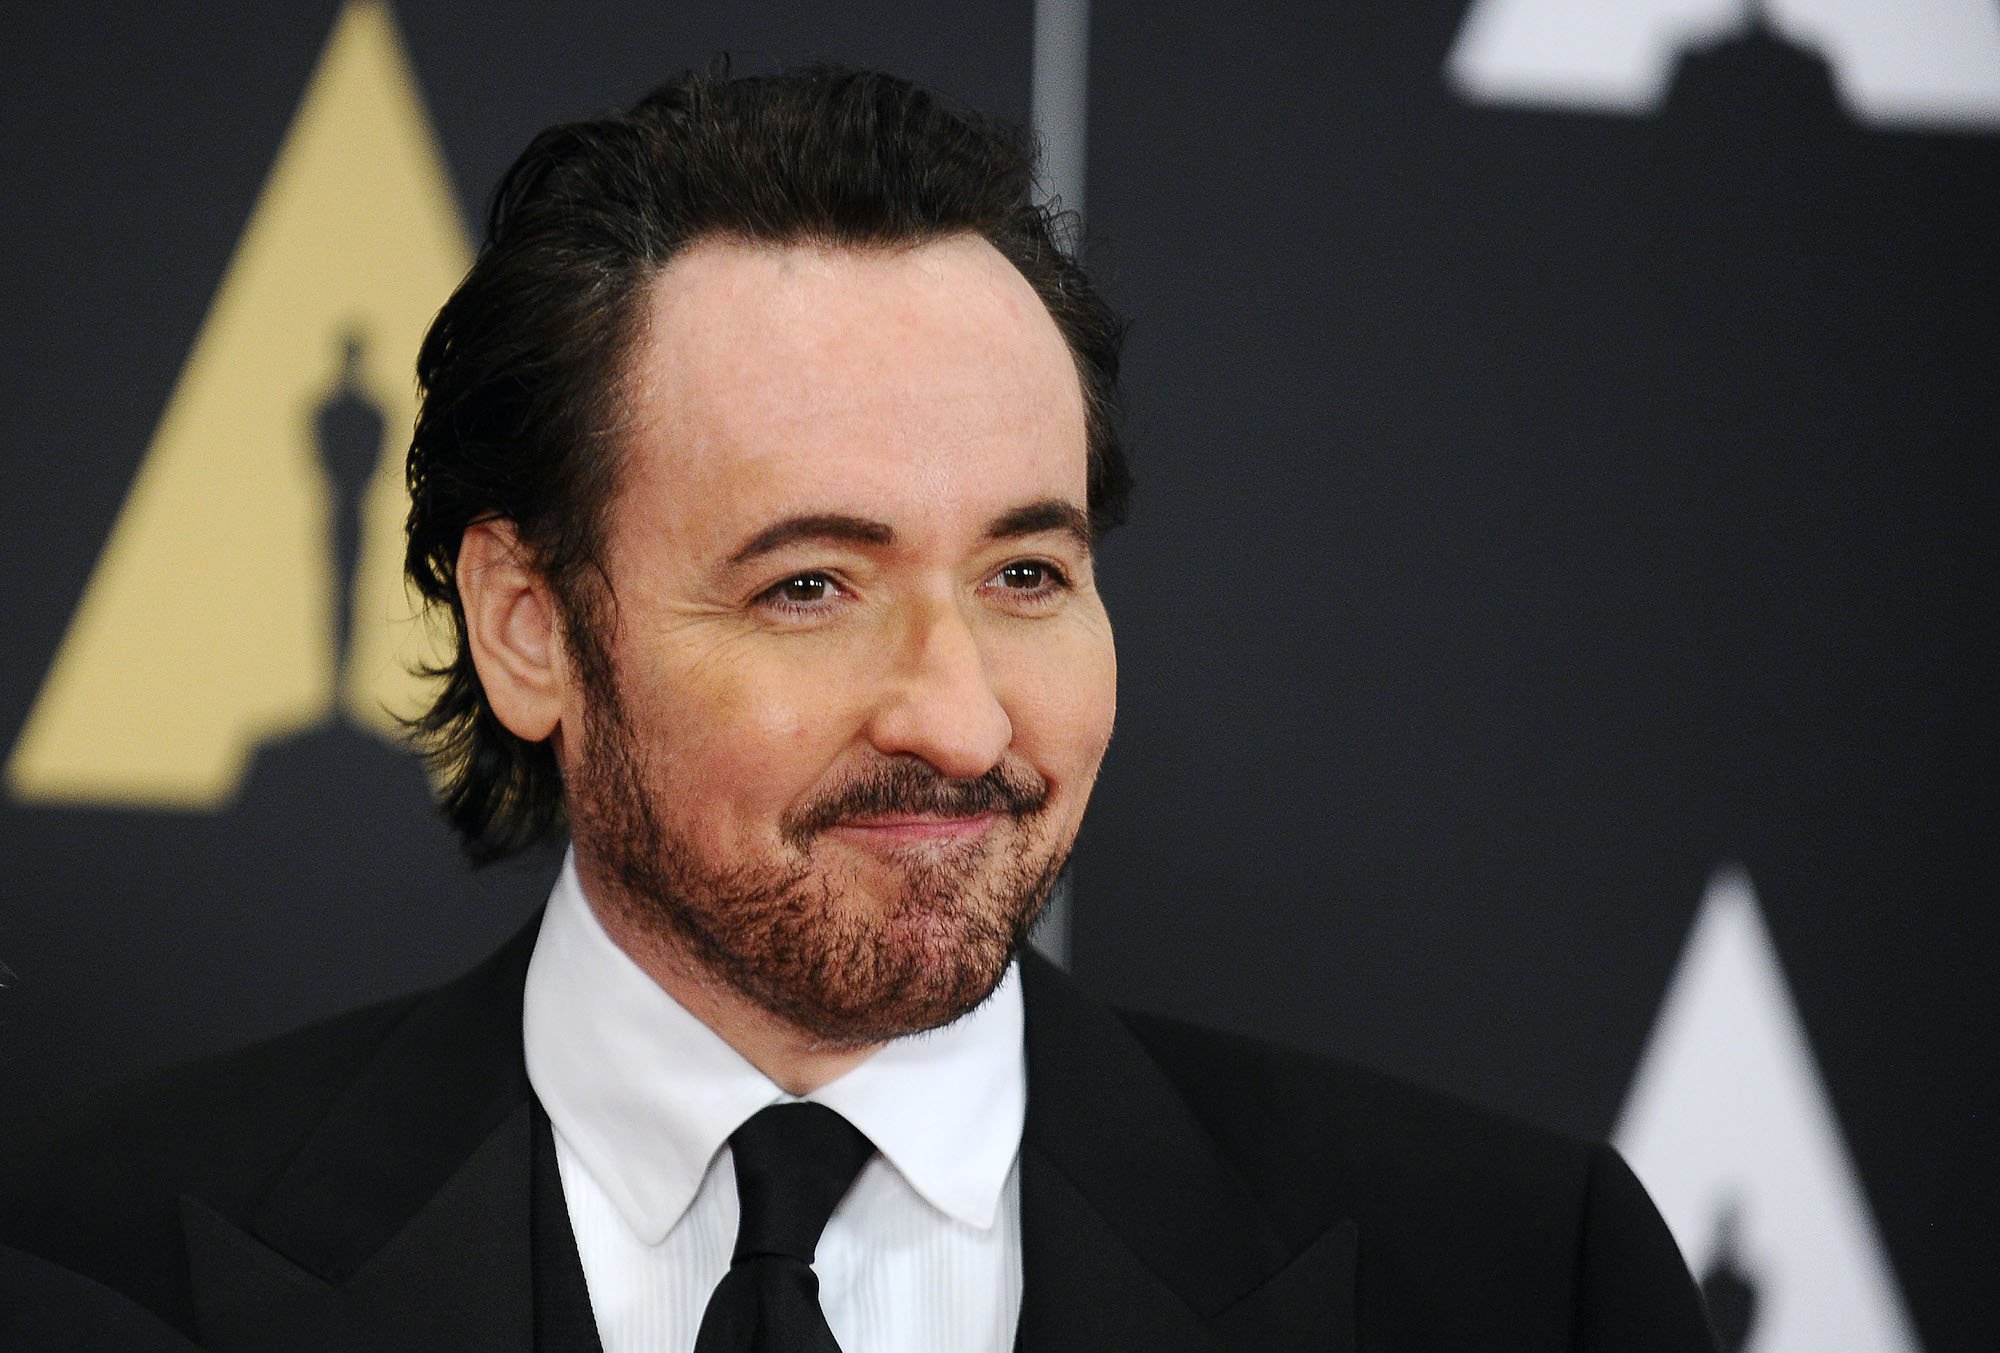 What Is John Cusack’s Net Worth?